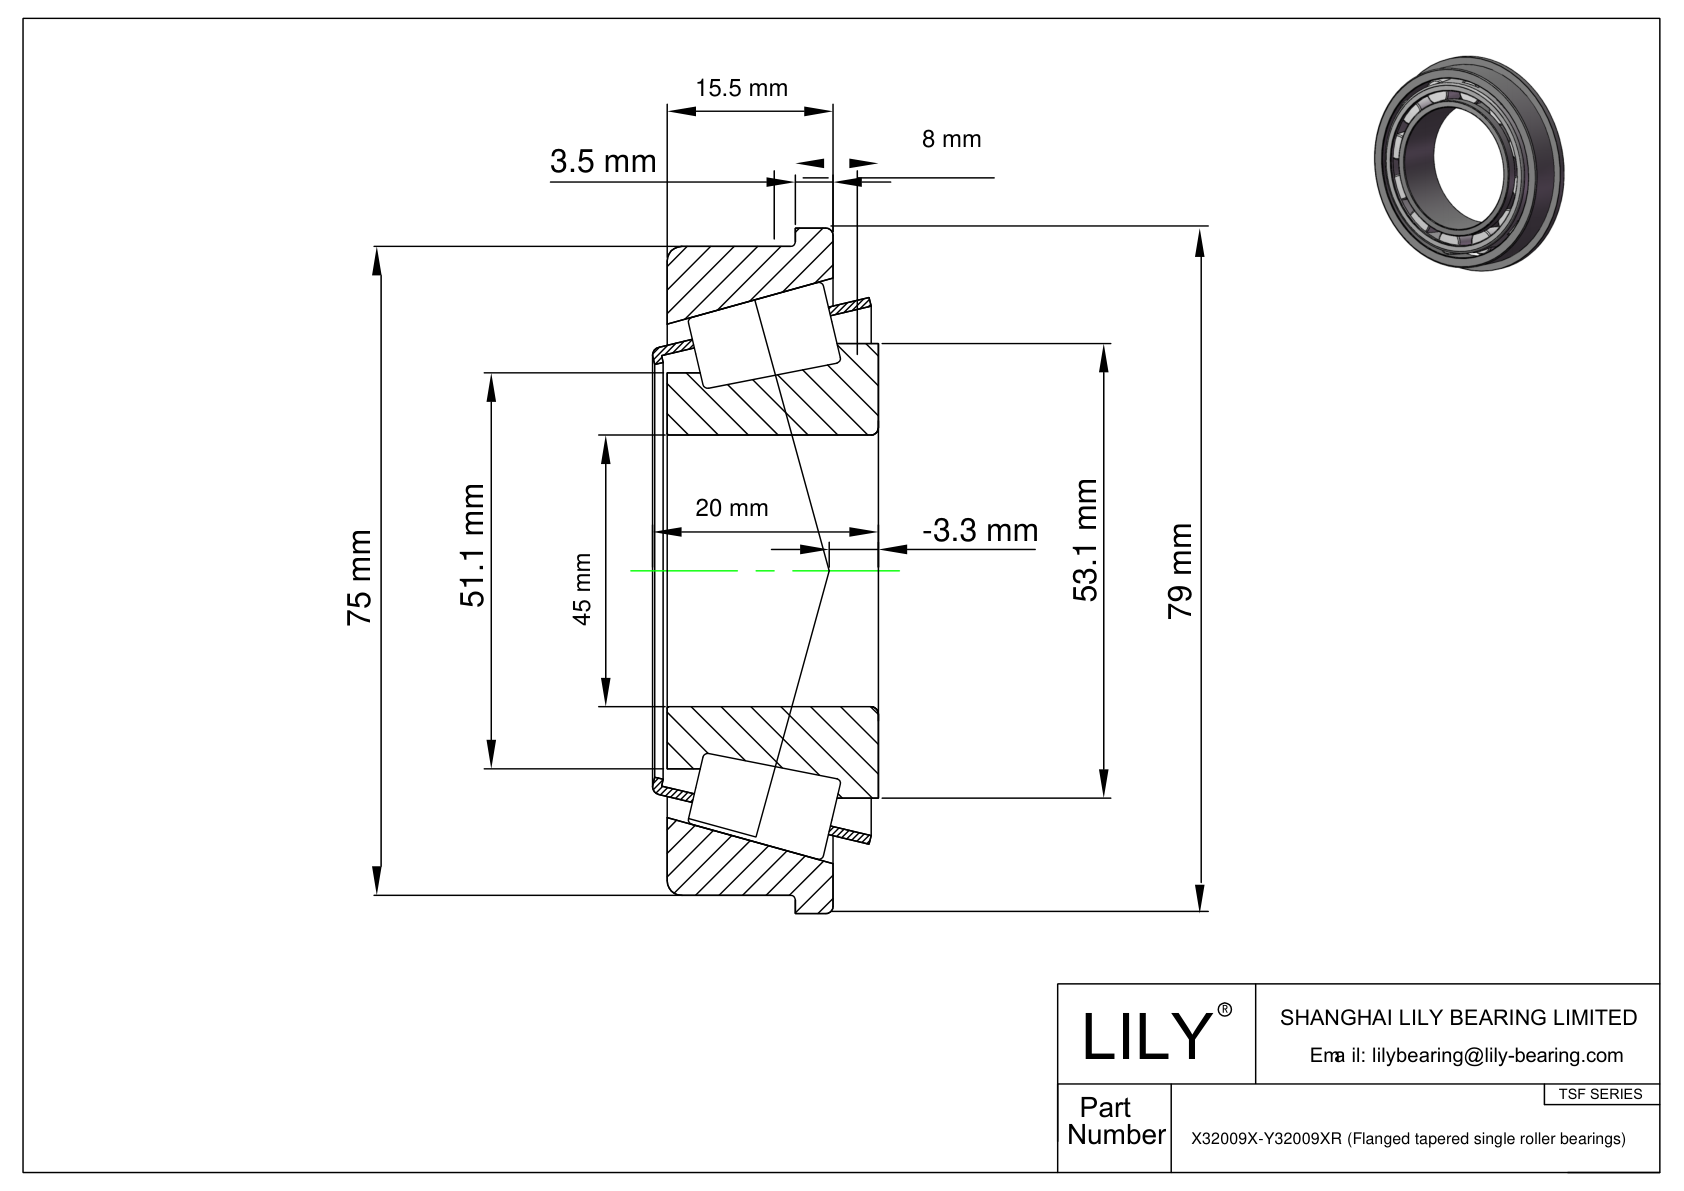 X32009X-Y32009XR TSF (Tapered Single Roller Bearings with Flange) (Metric) cad drawing